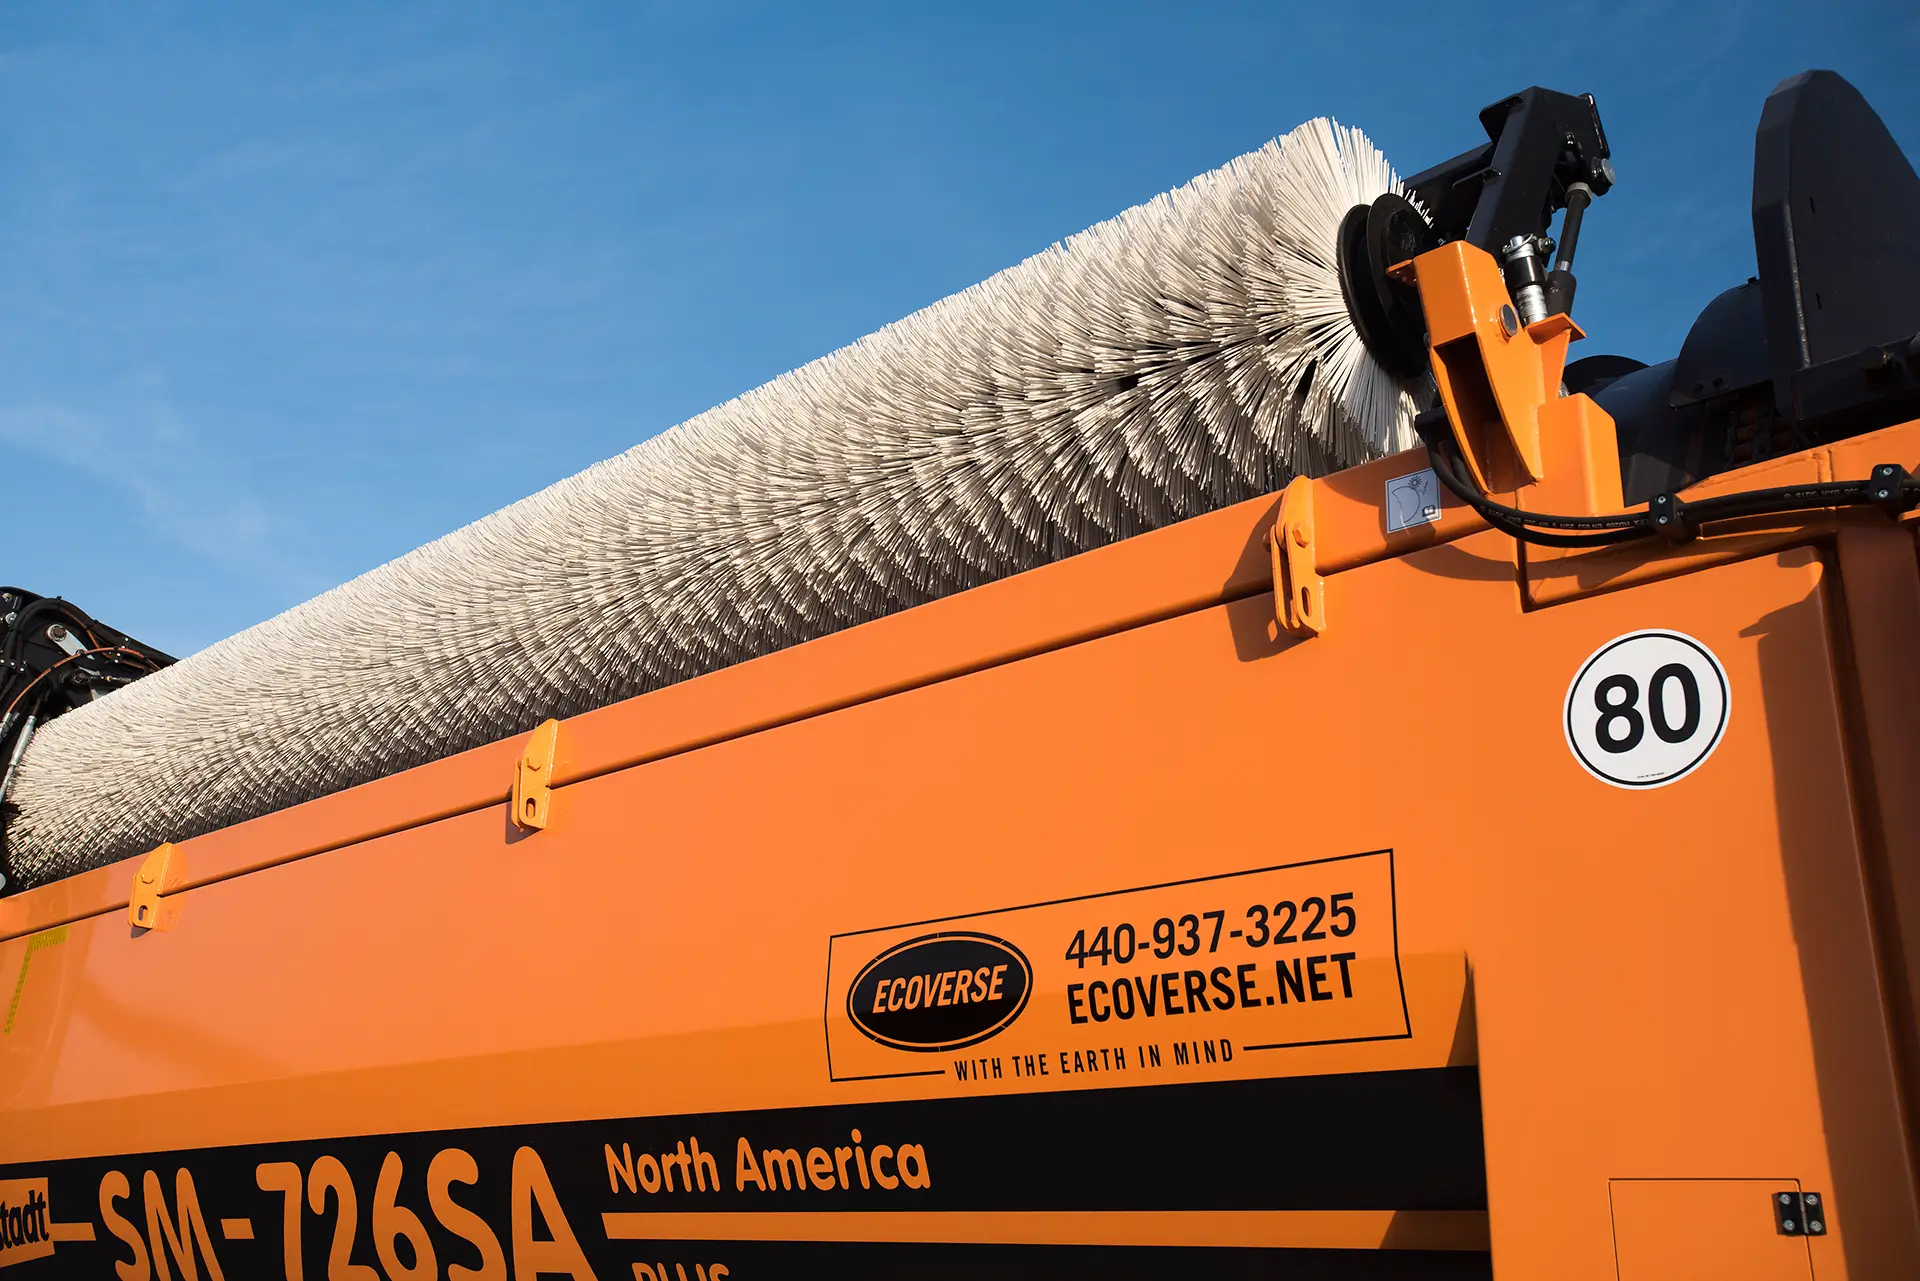 Doppstadt SM-Series trommel screens feature a cleaning brush to keep the drum clean.